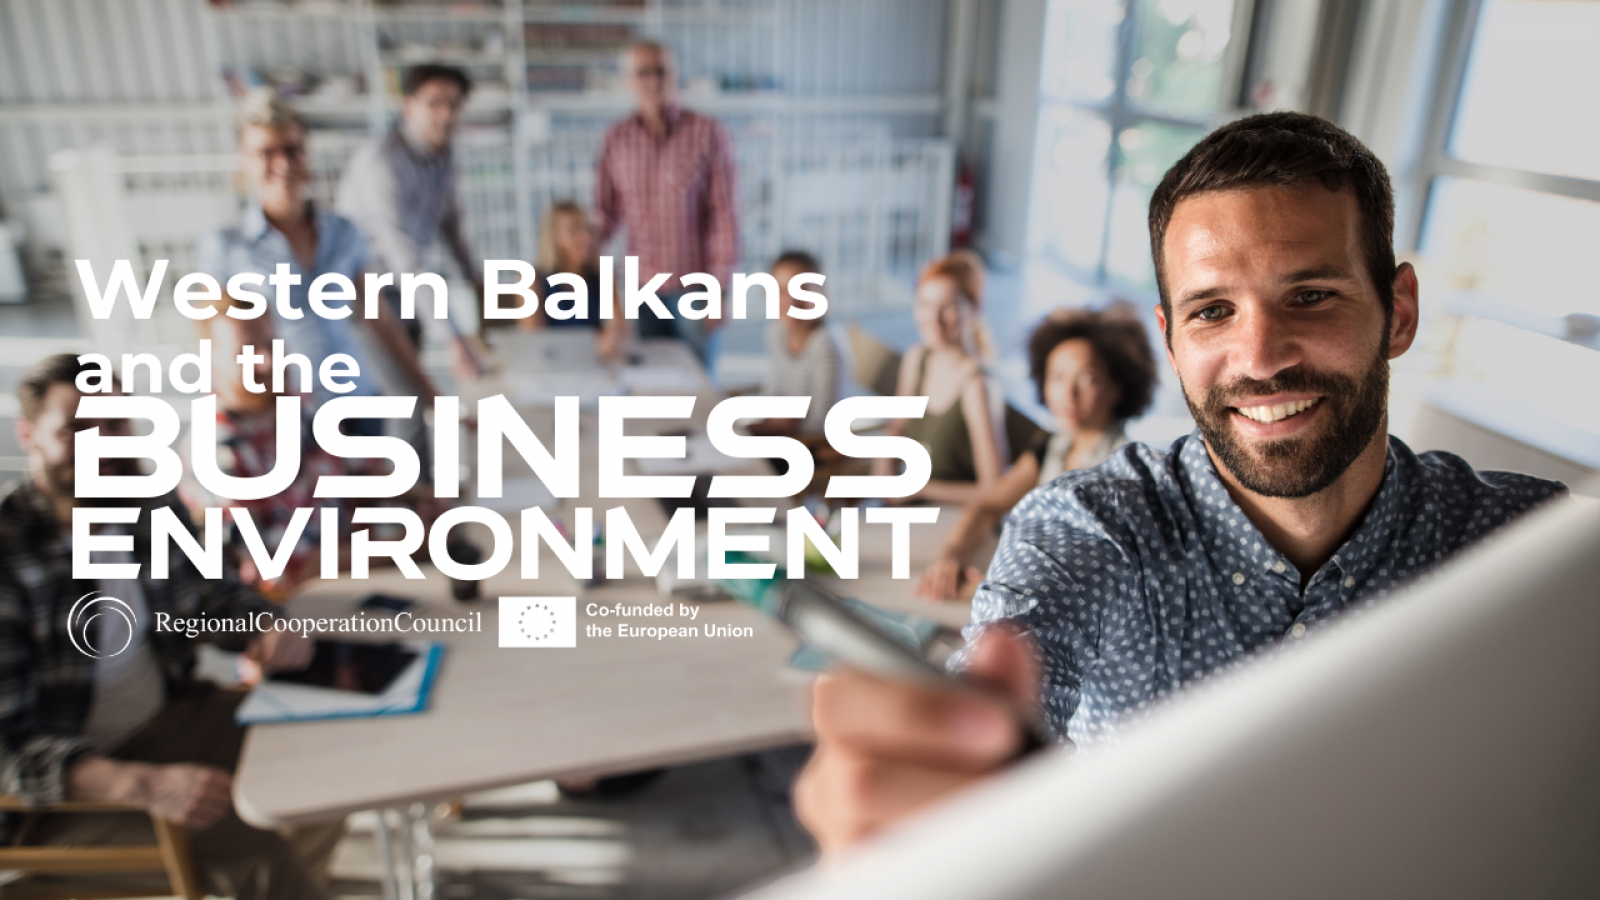 Western Balkans and business environment